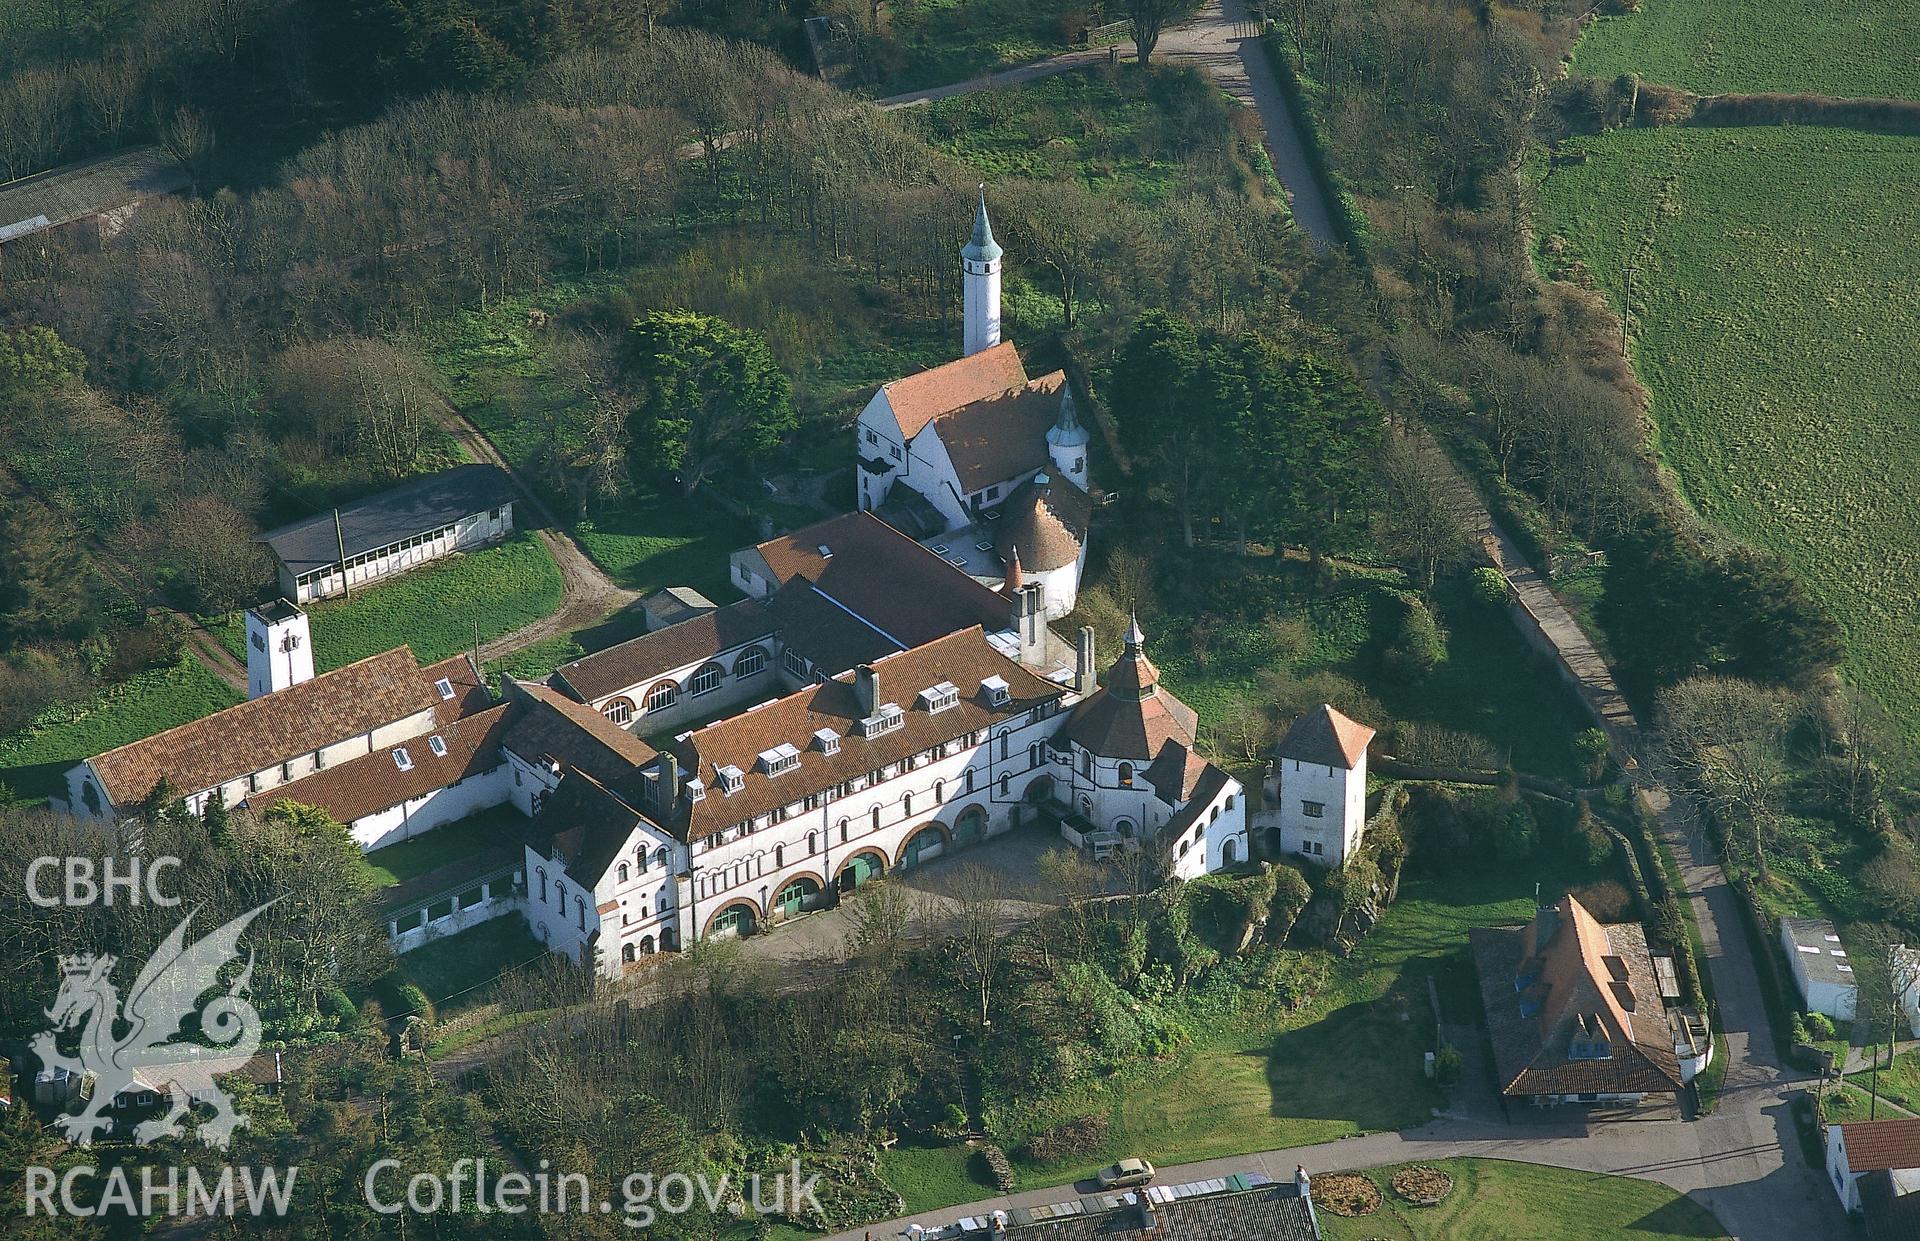 RCAHMW colour oblique aerial photograph of Caldey Island monastery. Taken by C R Musson on 13/04/1995